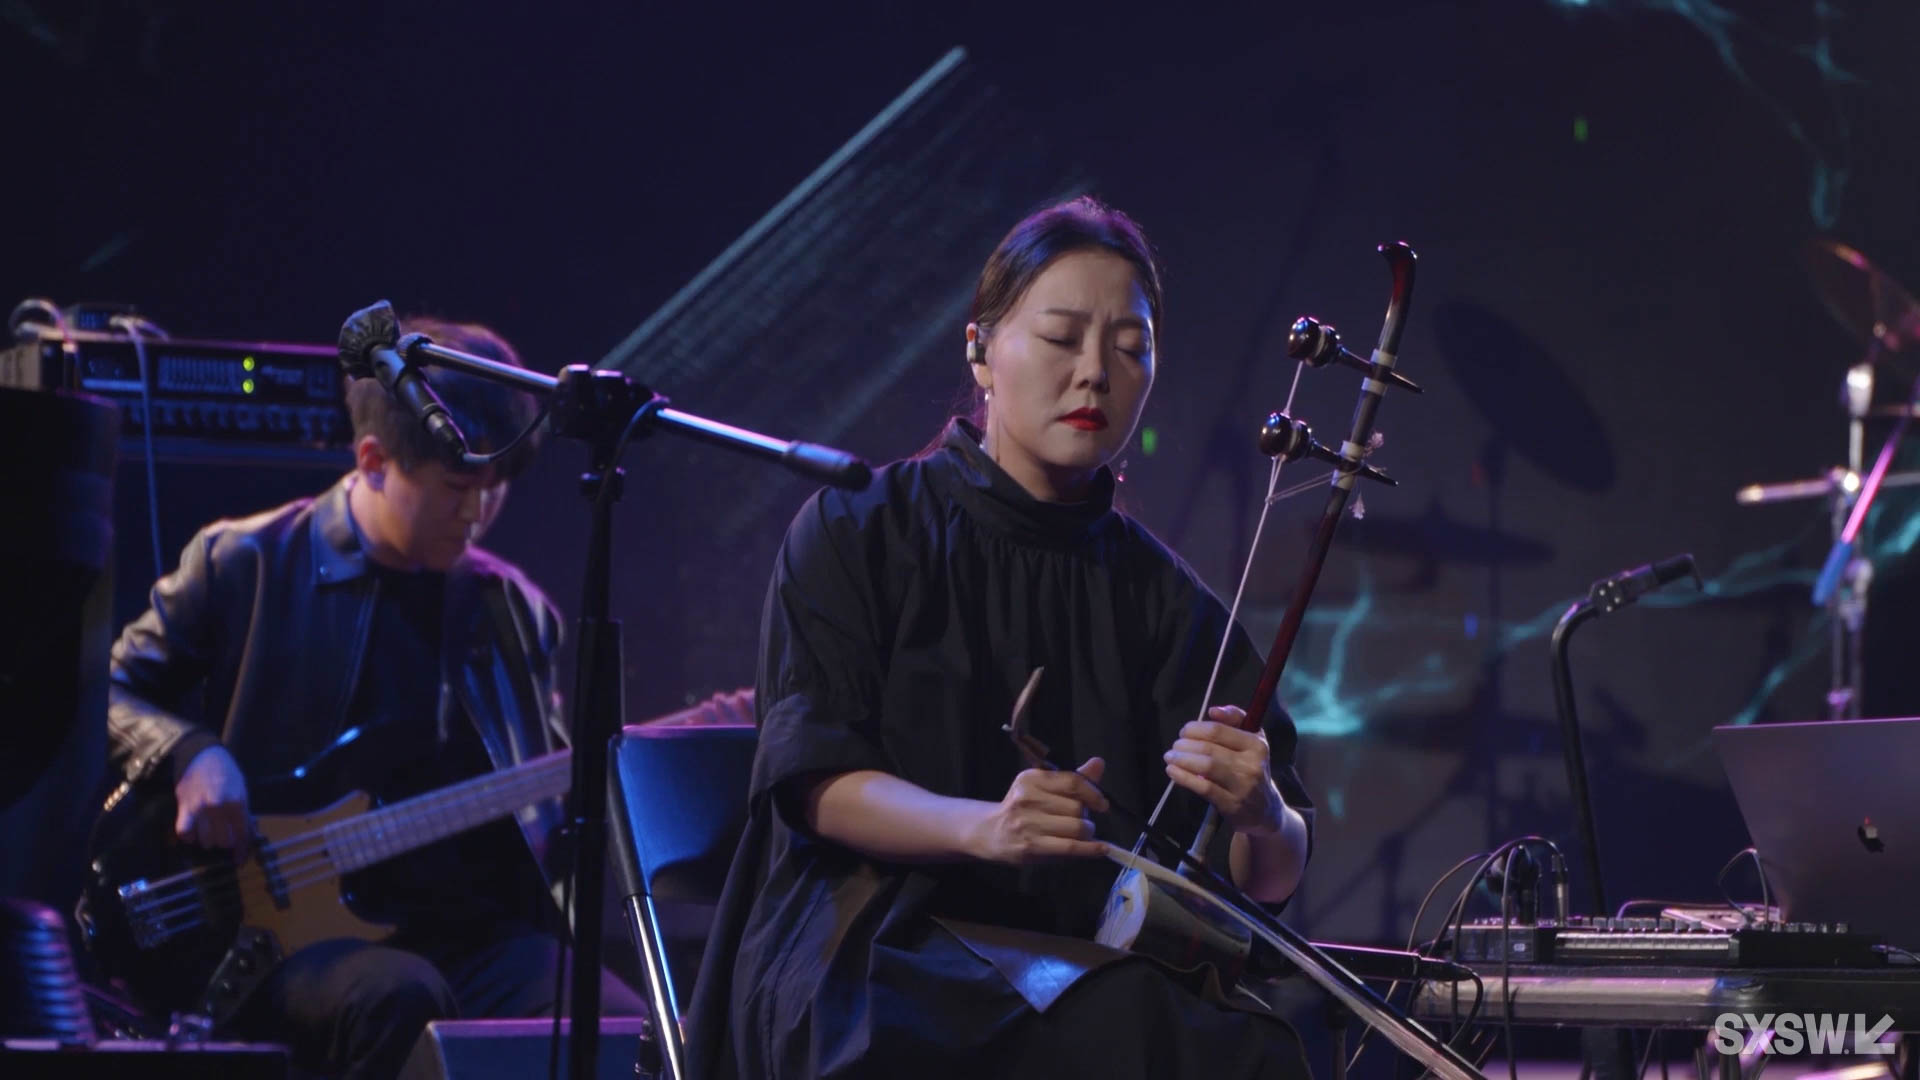 JAMBINAI performs at the SXSW Music Festival showcase presented by KoTPA (Korean Traditional Performing Arts Foundation) during SXSW Online on March 16, 2021.